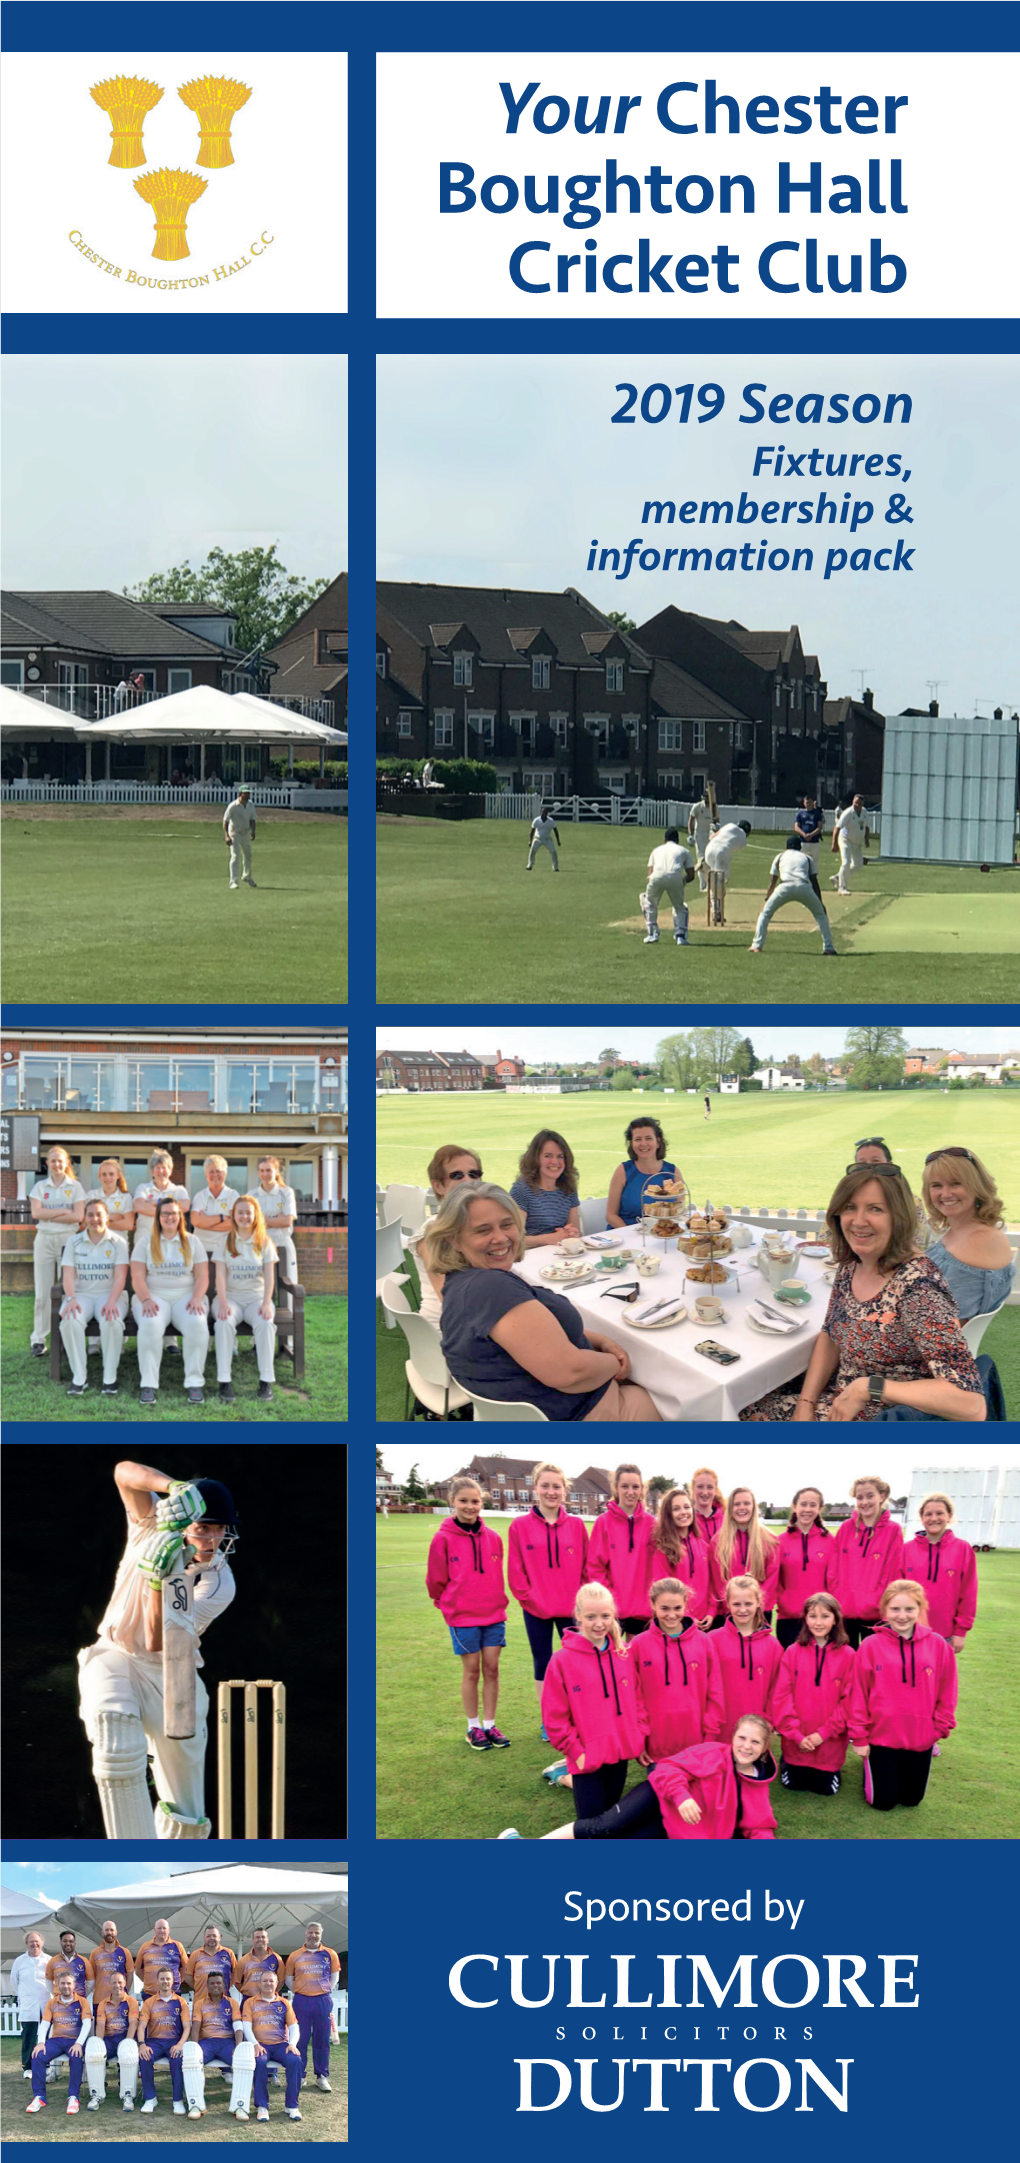 Your Chester Boughton Hall Cricket Club